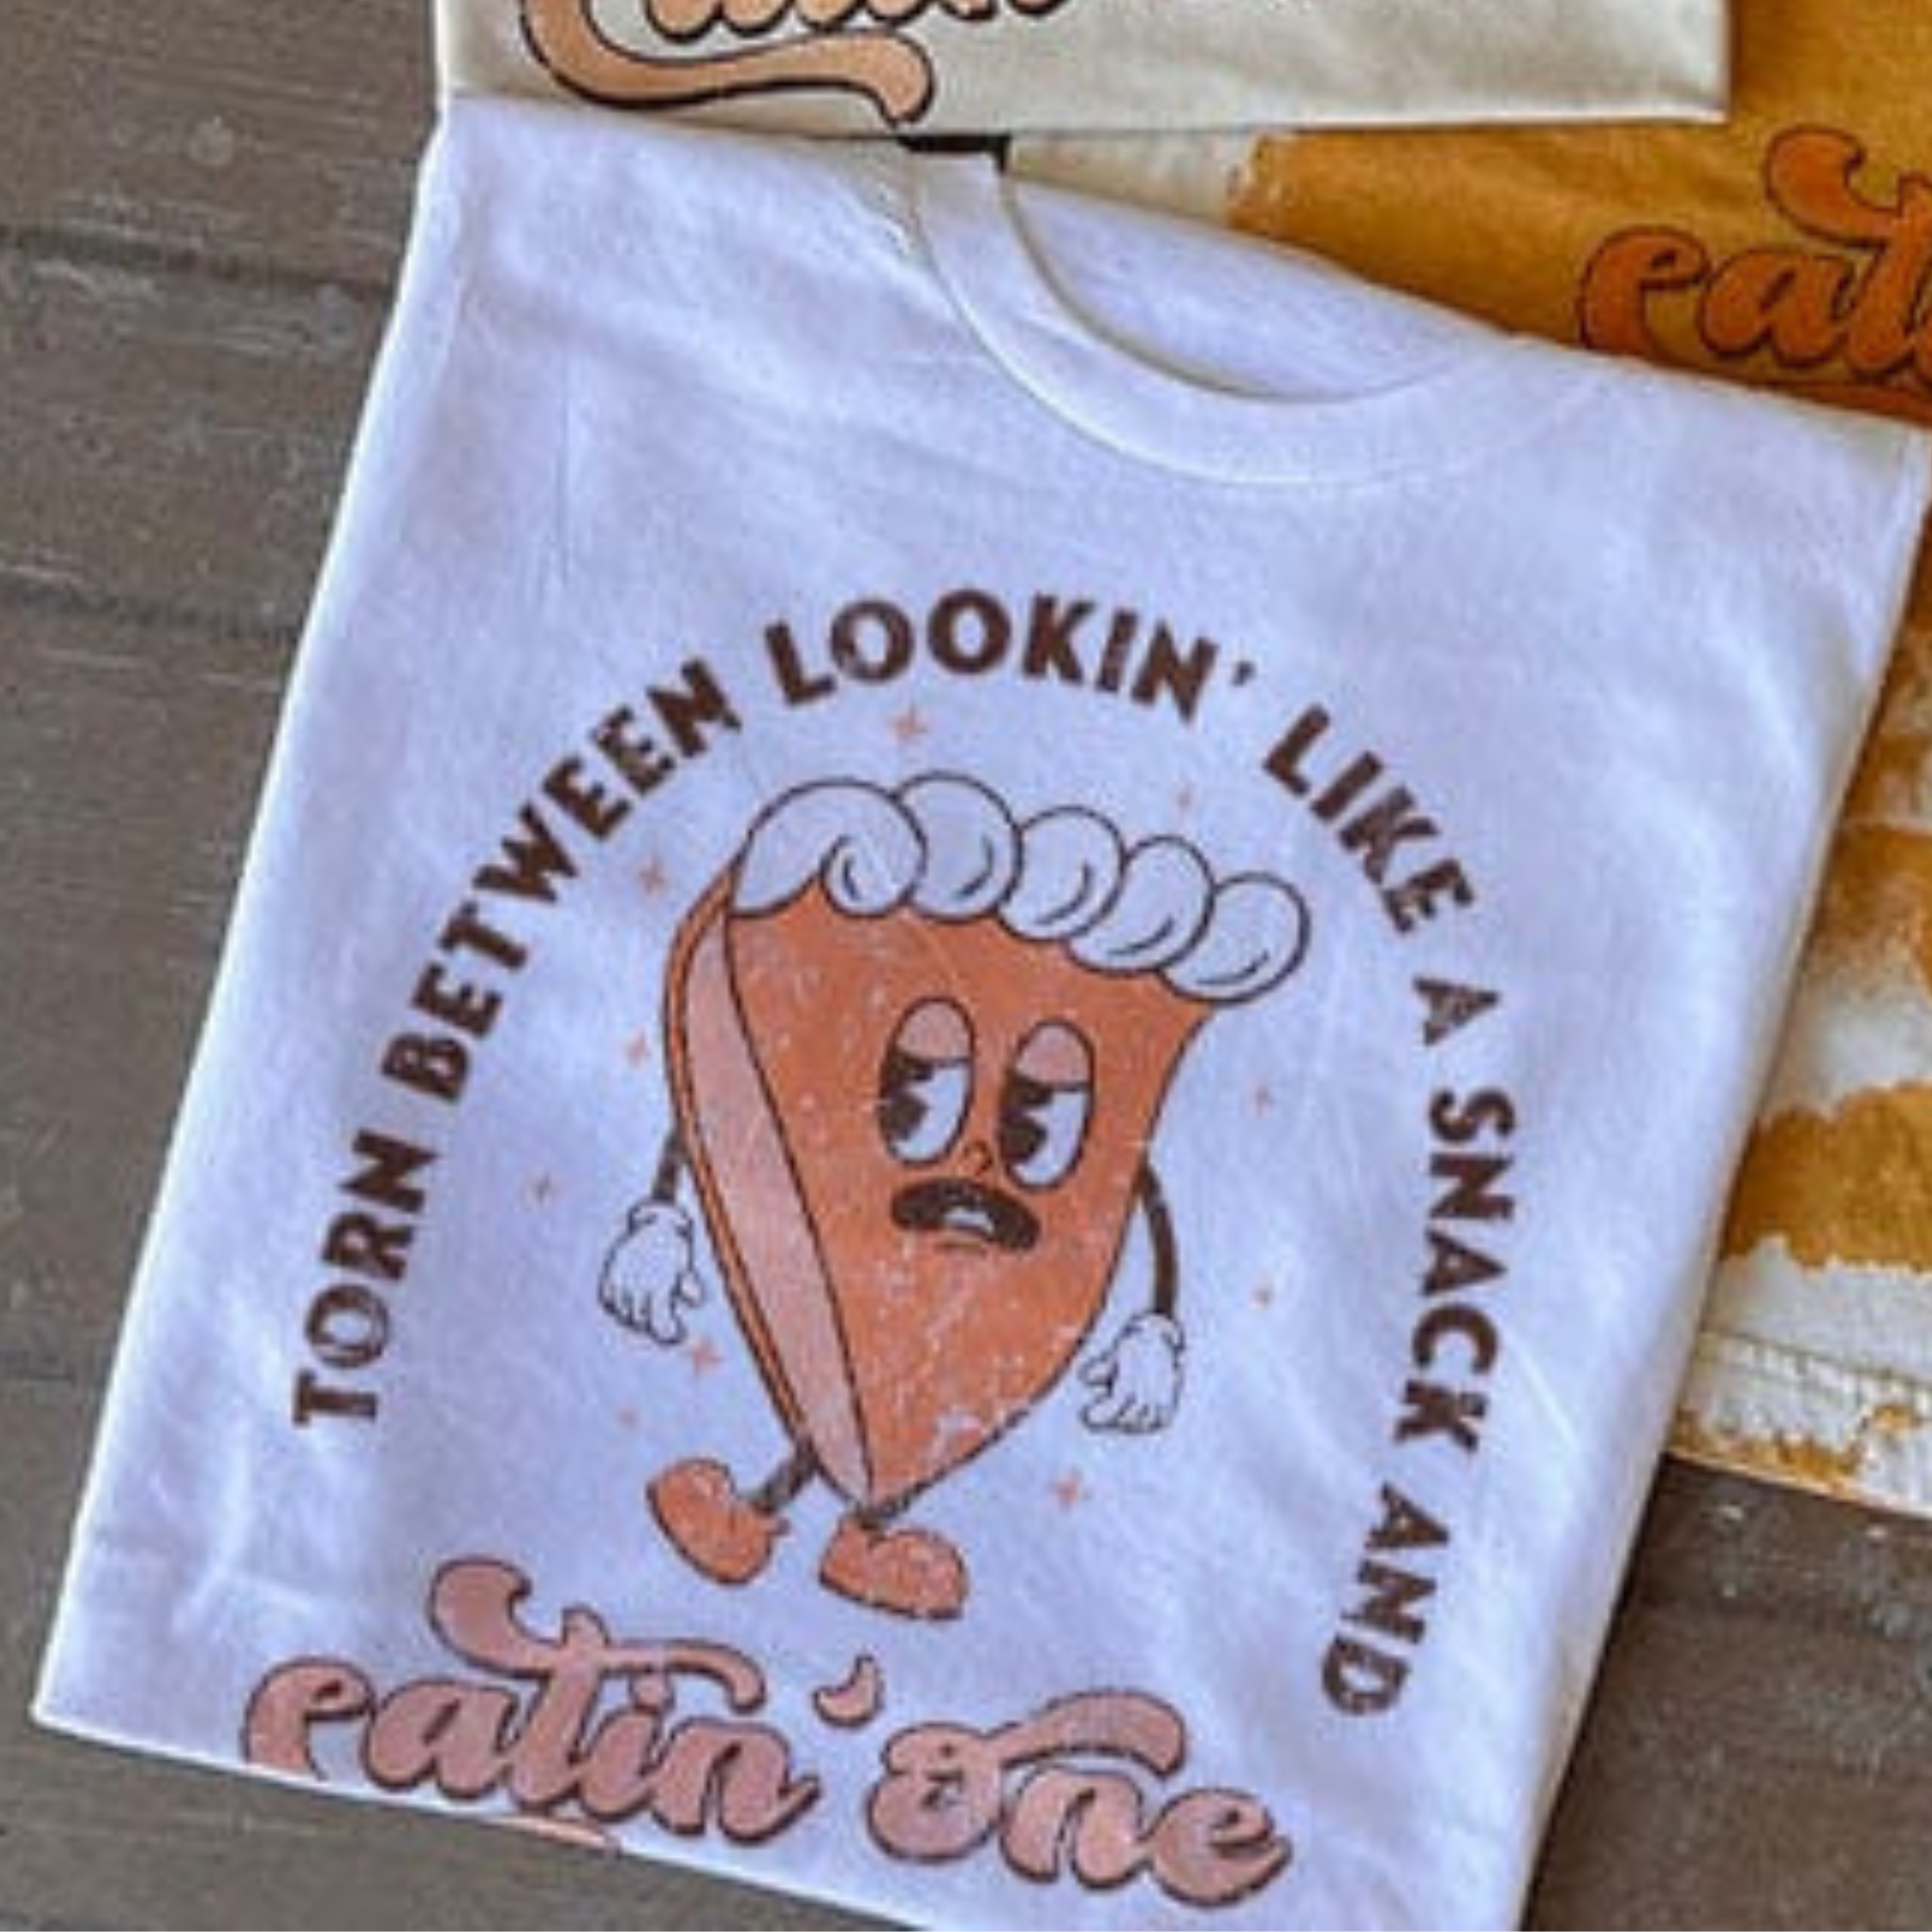 This white tee includes a crew neckline, short sleeves, and a cute hand drawn design of a slice of pie with the words "Torn Between Lookin' Like A Snack And Eatin' One" around it. It is shown styled as a folded flat lay.